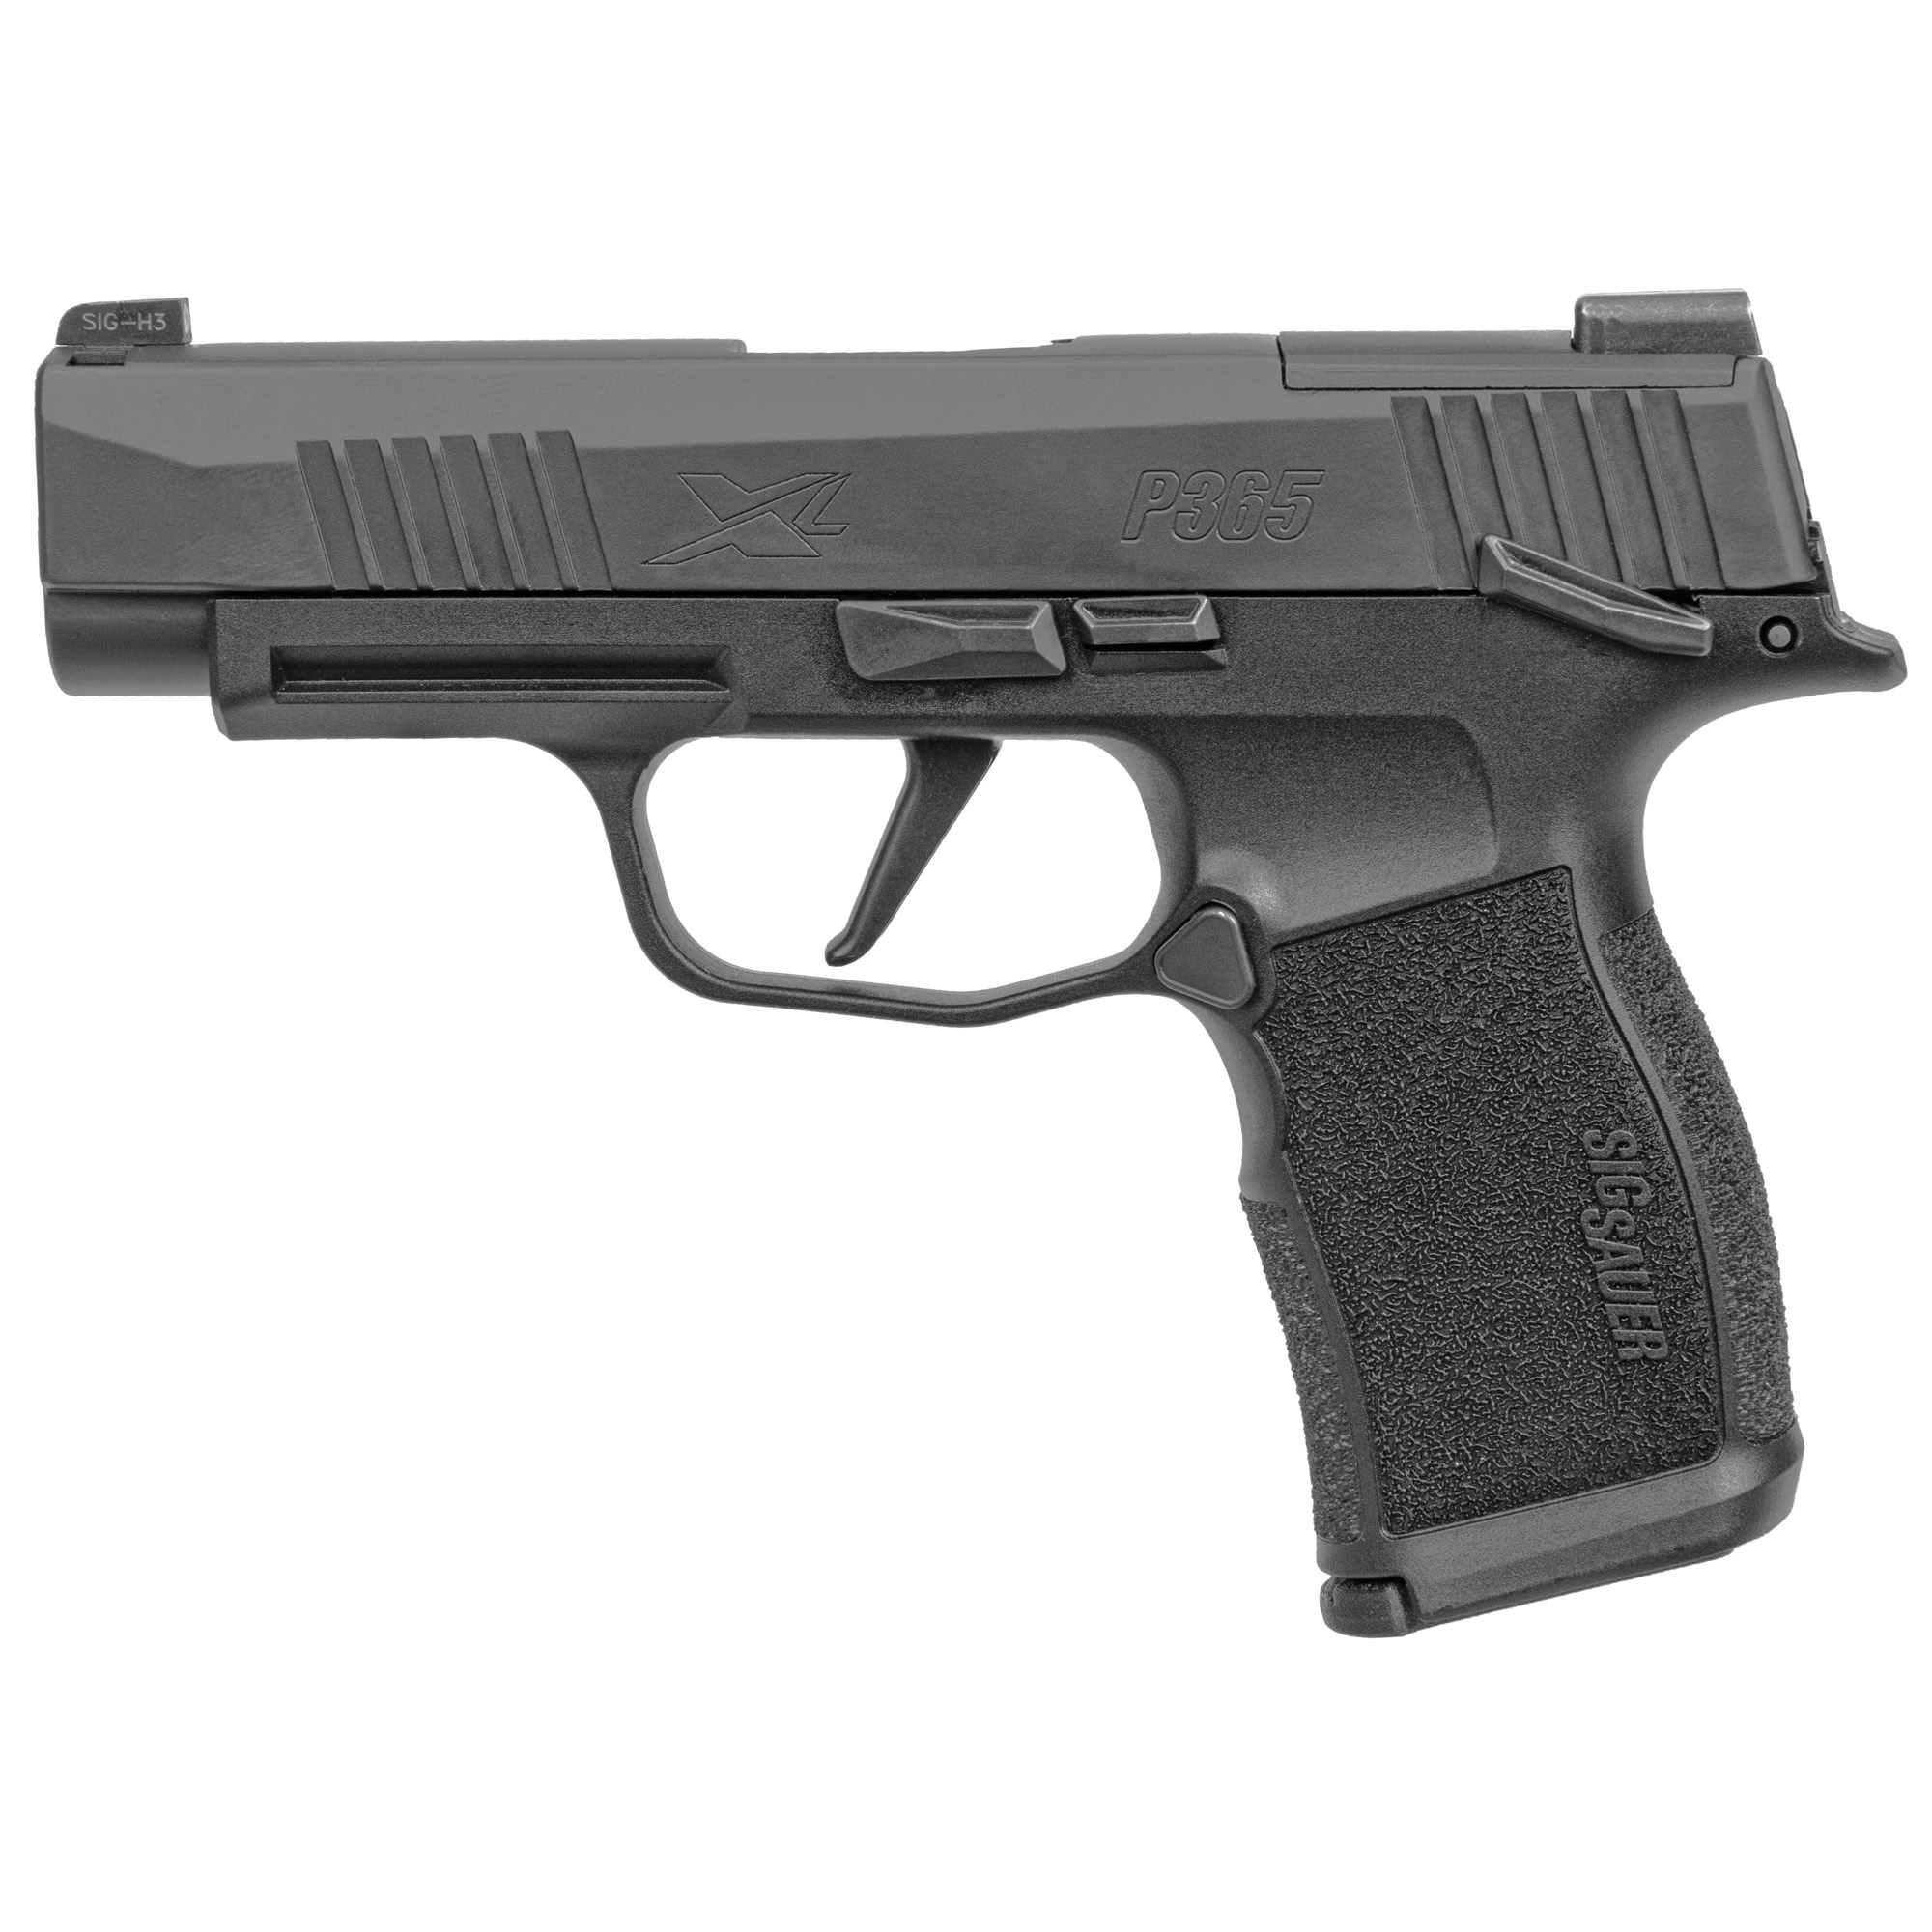 Sig Sauer P365 XL 9mm Pistol with Manual Safety, Black (365XL-9-BXR3-MS)